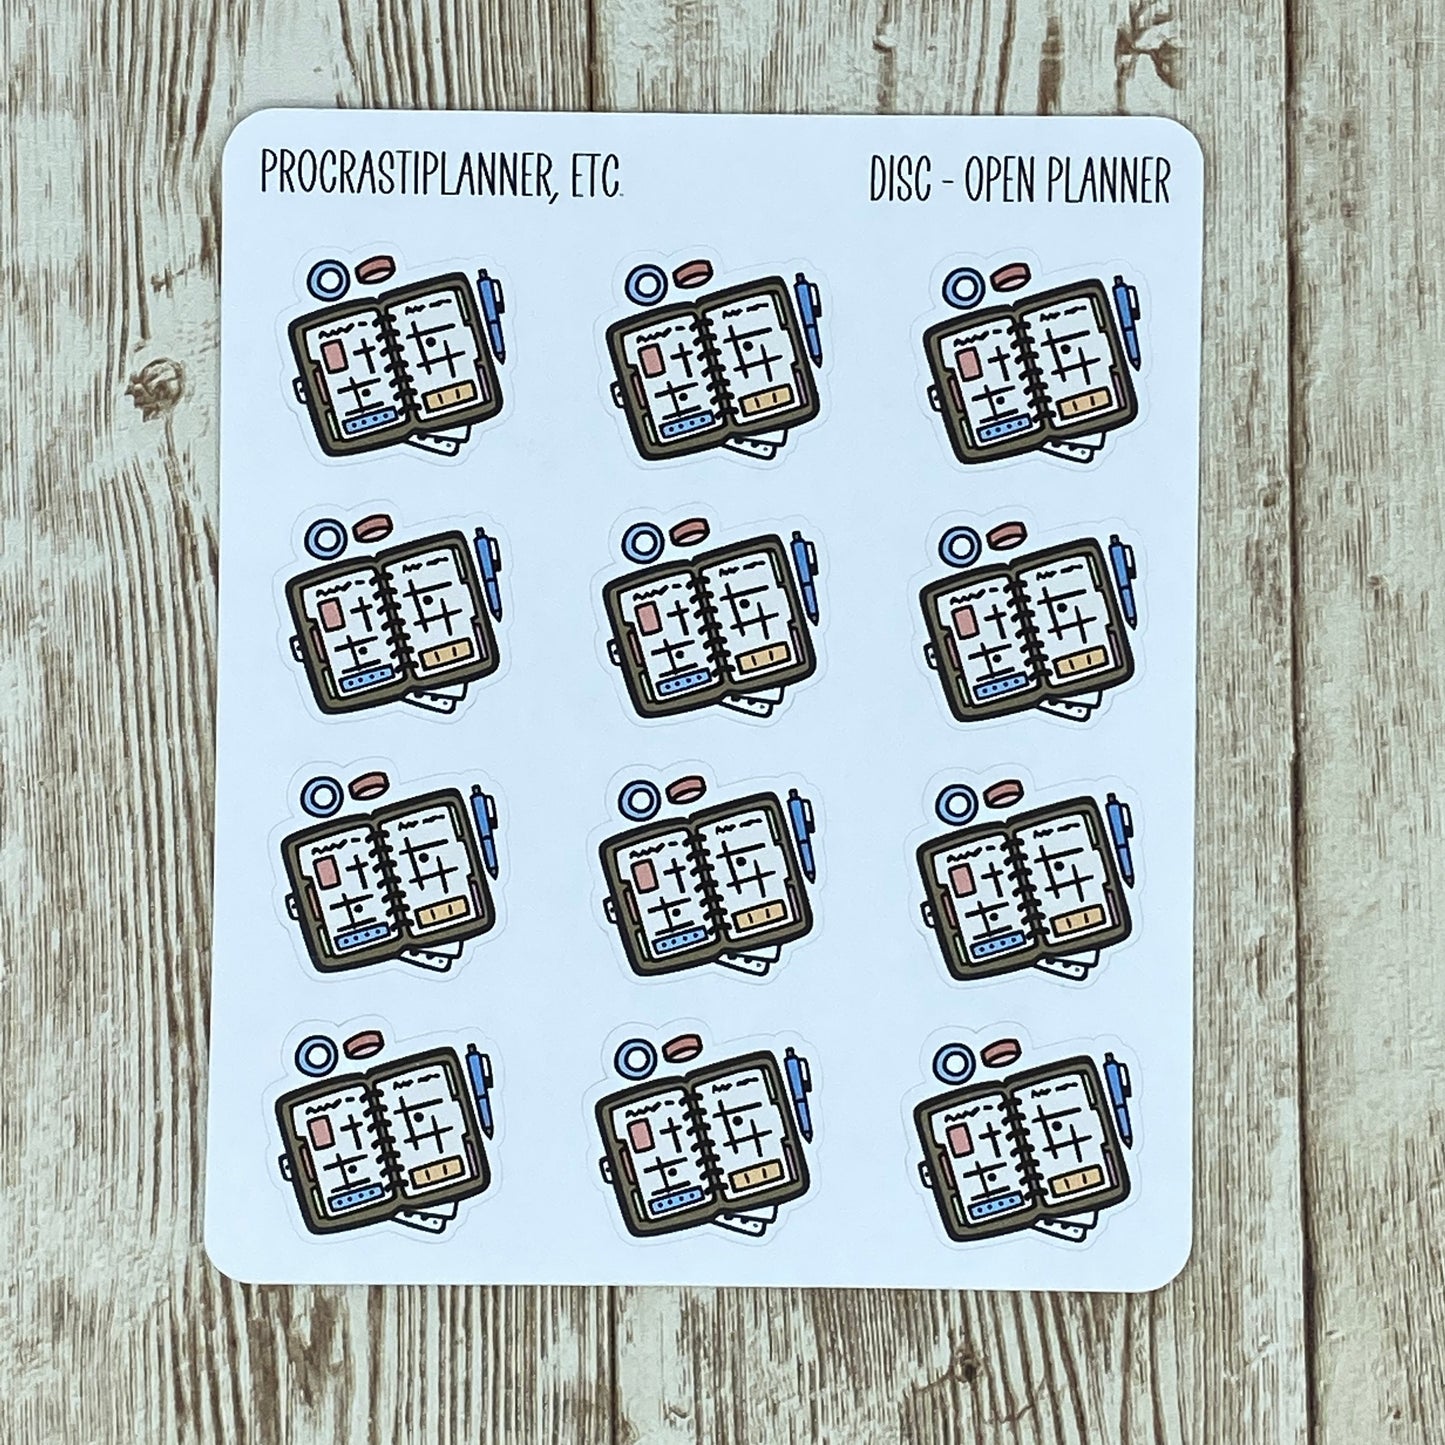 Open Face Disc Planner - Planner Stickers for Agendas, Journals and Scrapbooking